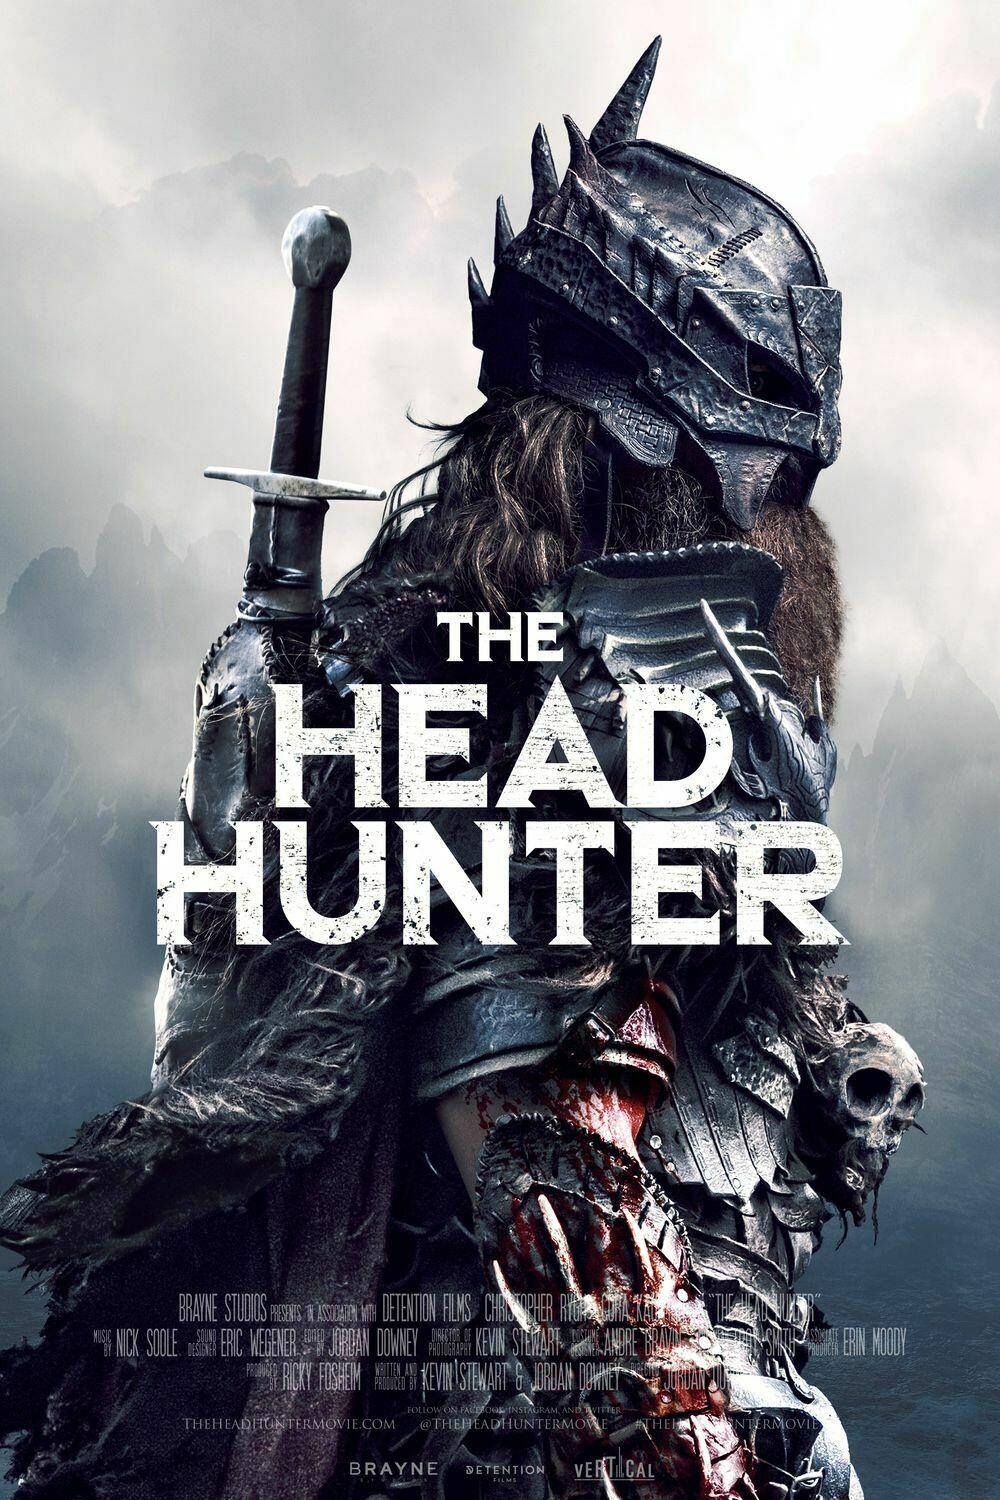 Head Hunter Official Movie Poster Featuring a warrior with skulls on his belt